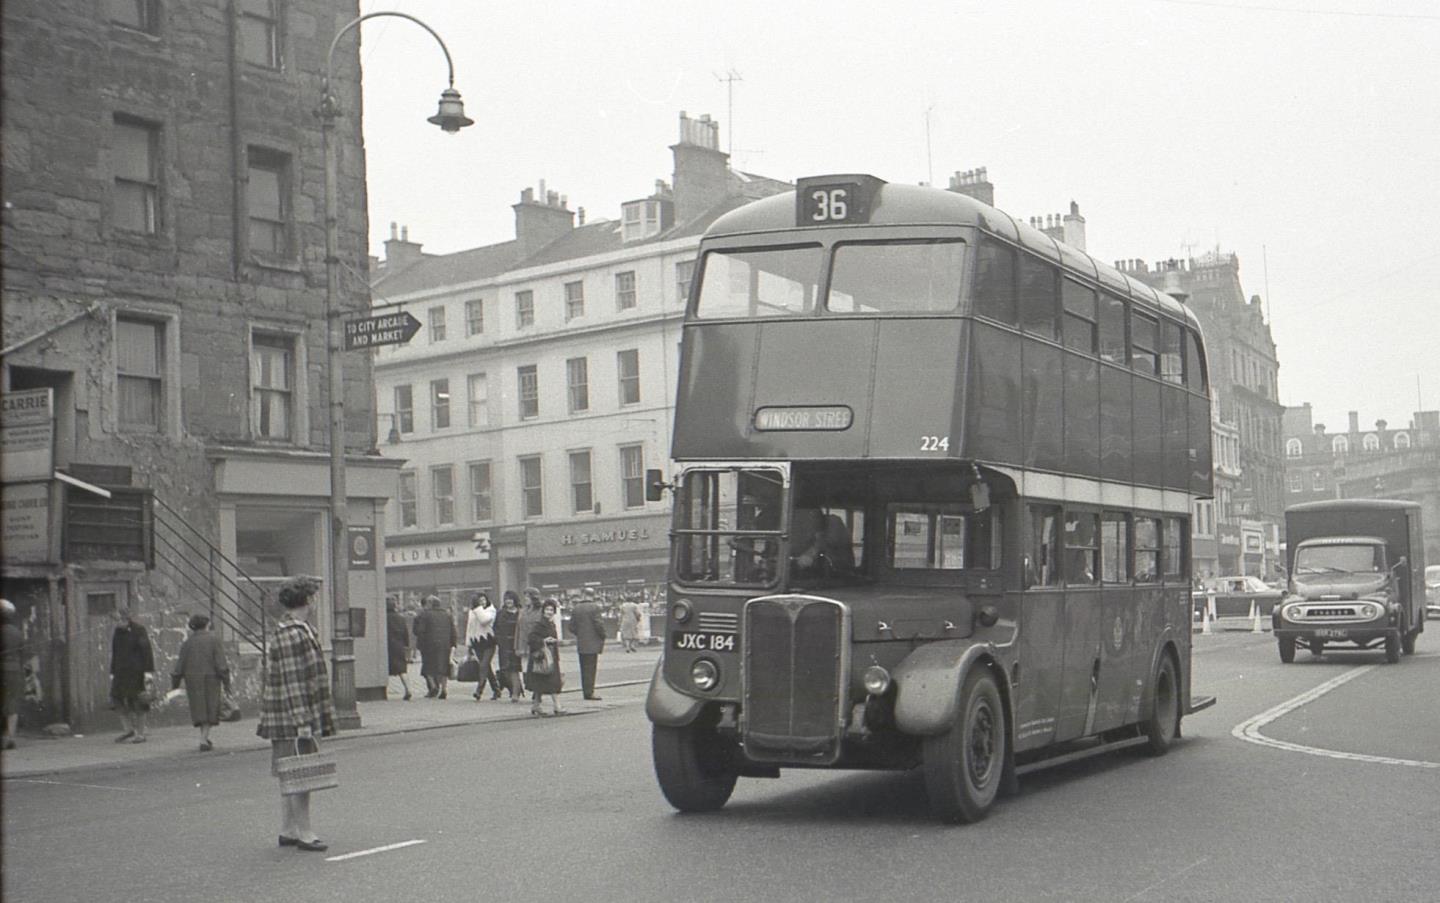 Bus 224 makes its way out of the city centre on service 36.